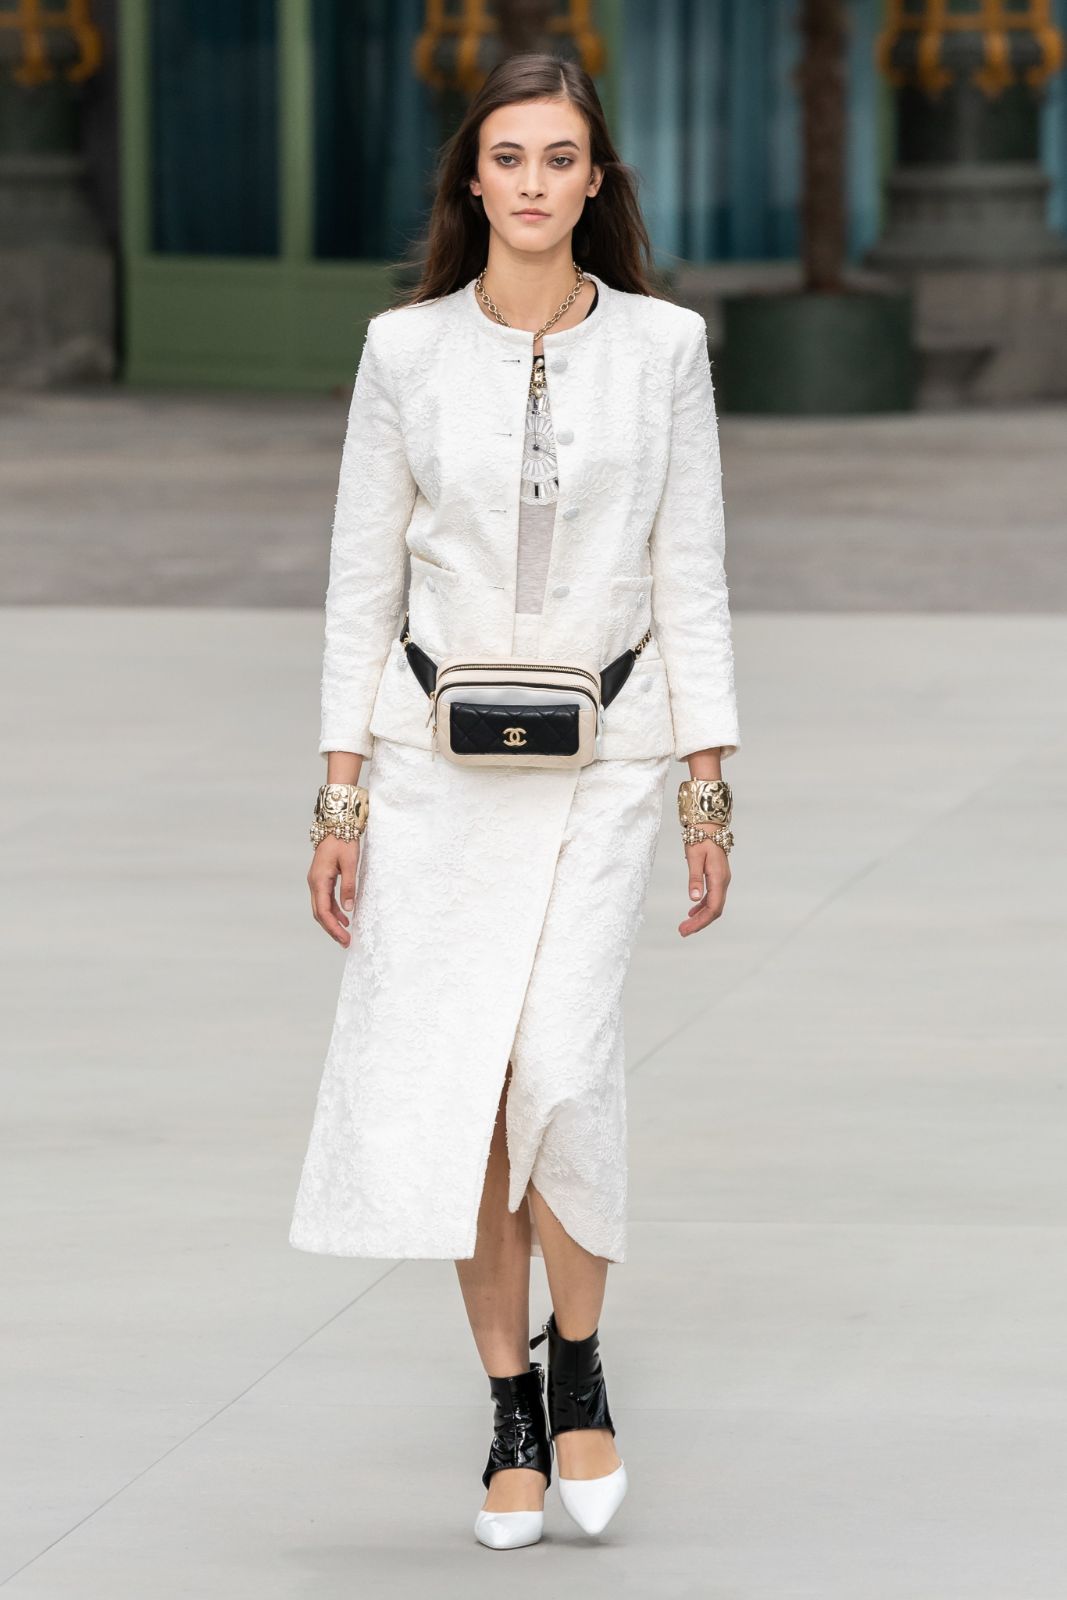 Chanel Debuts Virginie Viard's First Solo Collection for Resort